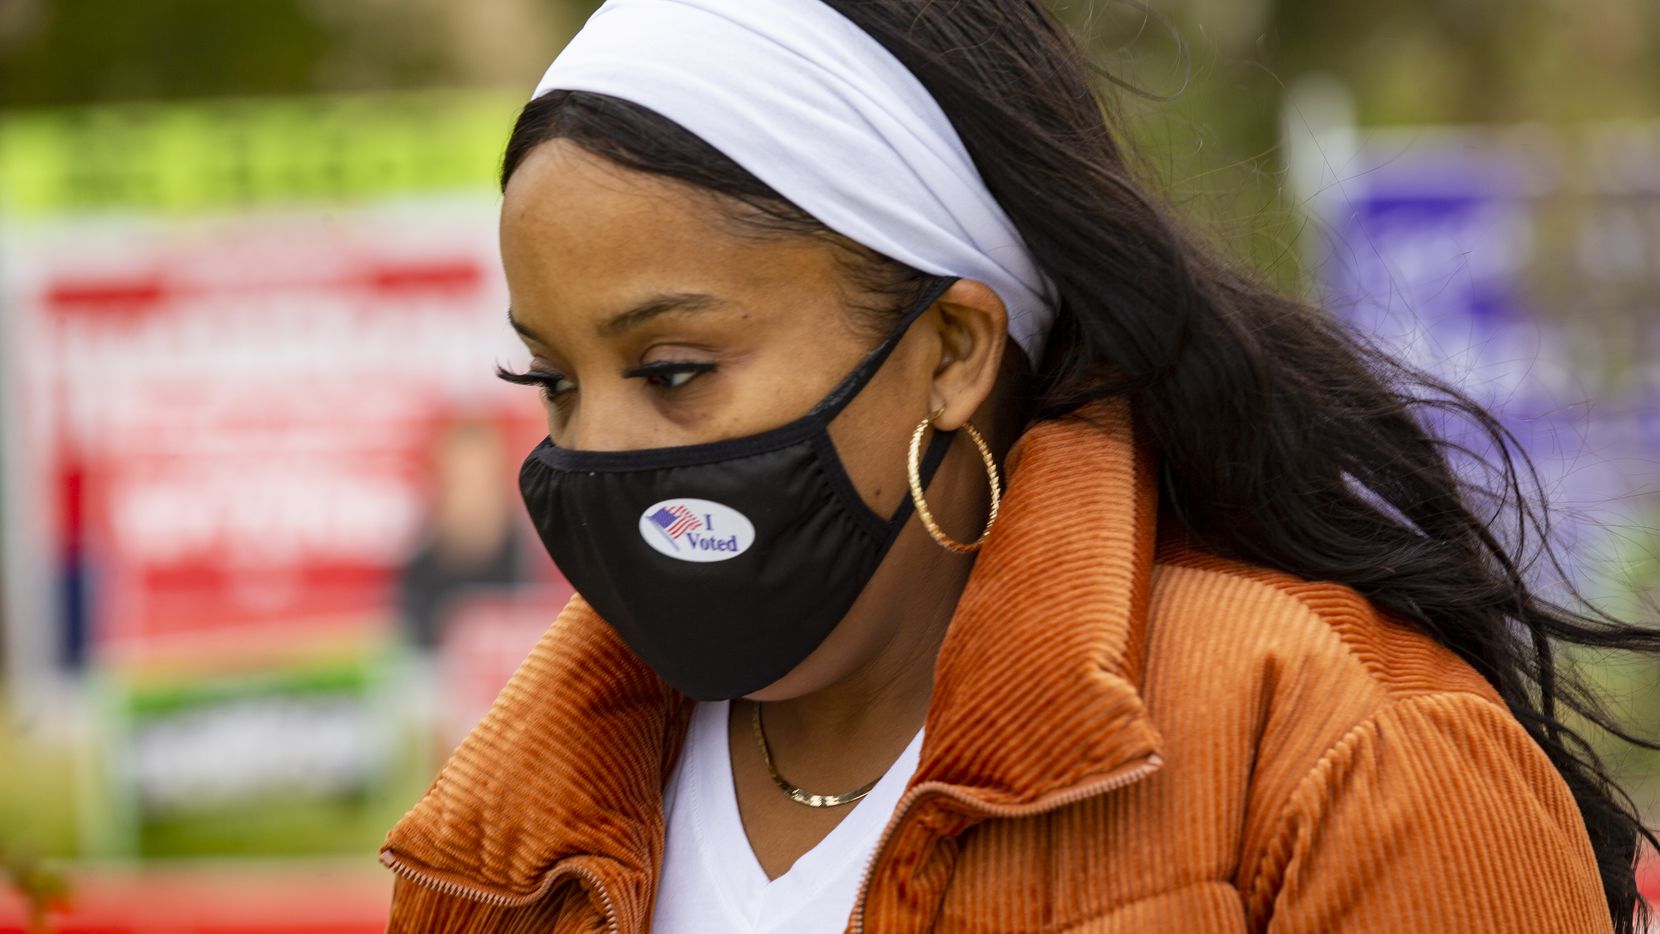 Wanda Brooks wears an "I voted" sticker on her mask after voting at the Collin College...